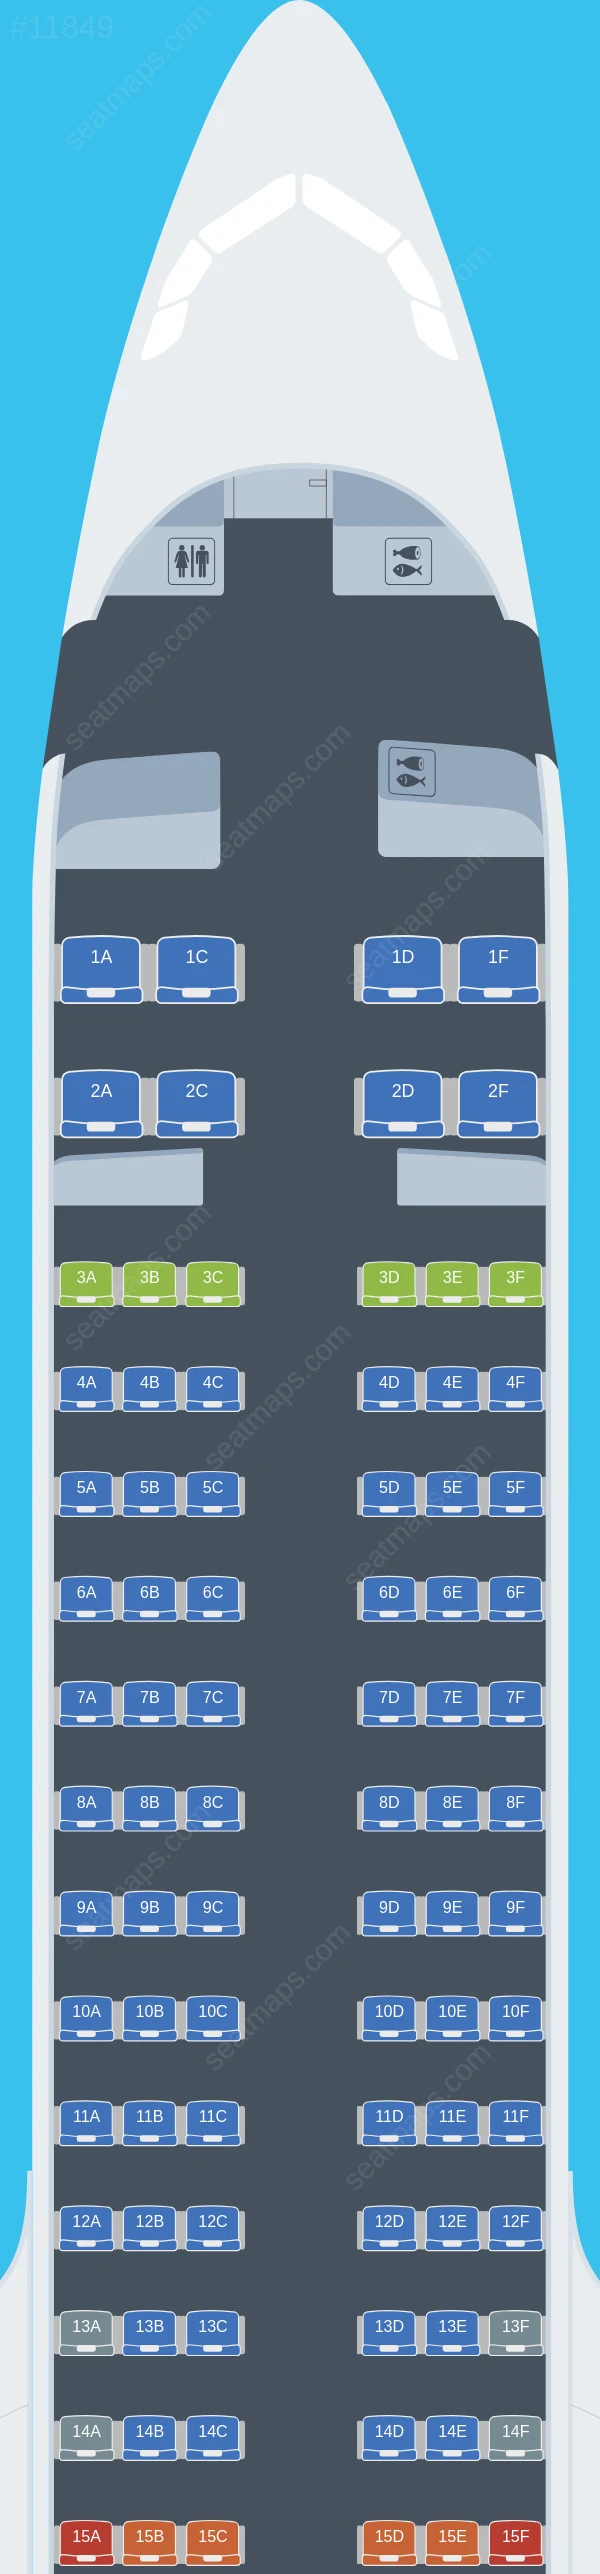 West Air Airbus A321neo aircraft seat map  A321neo